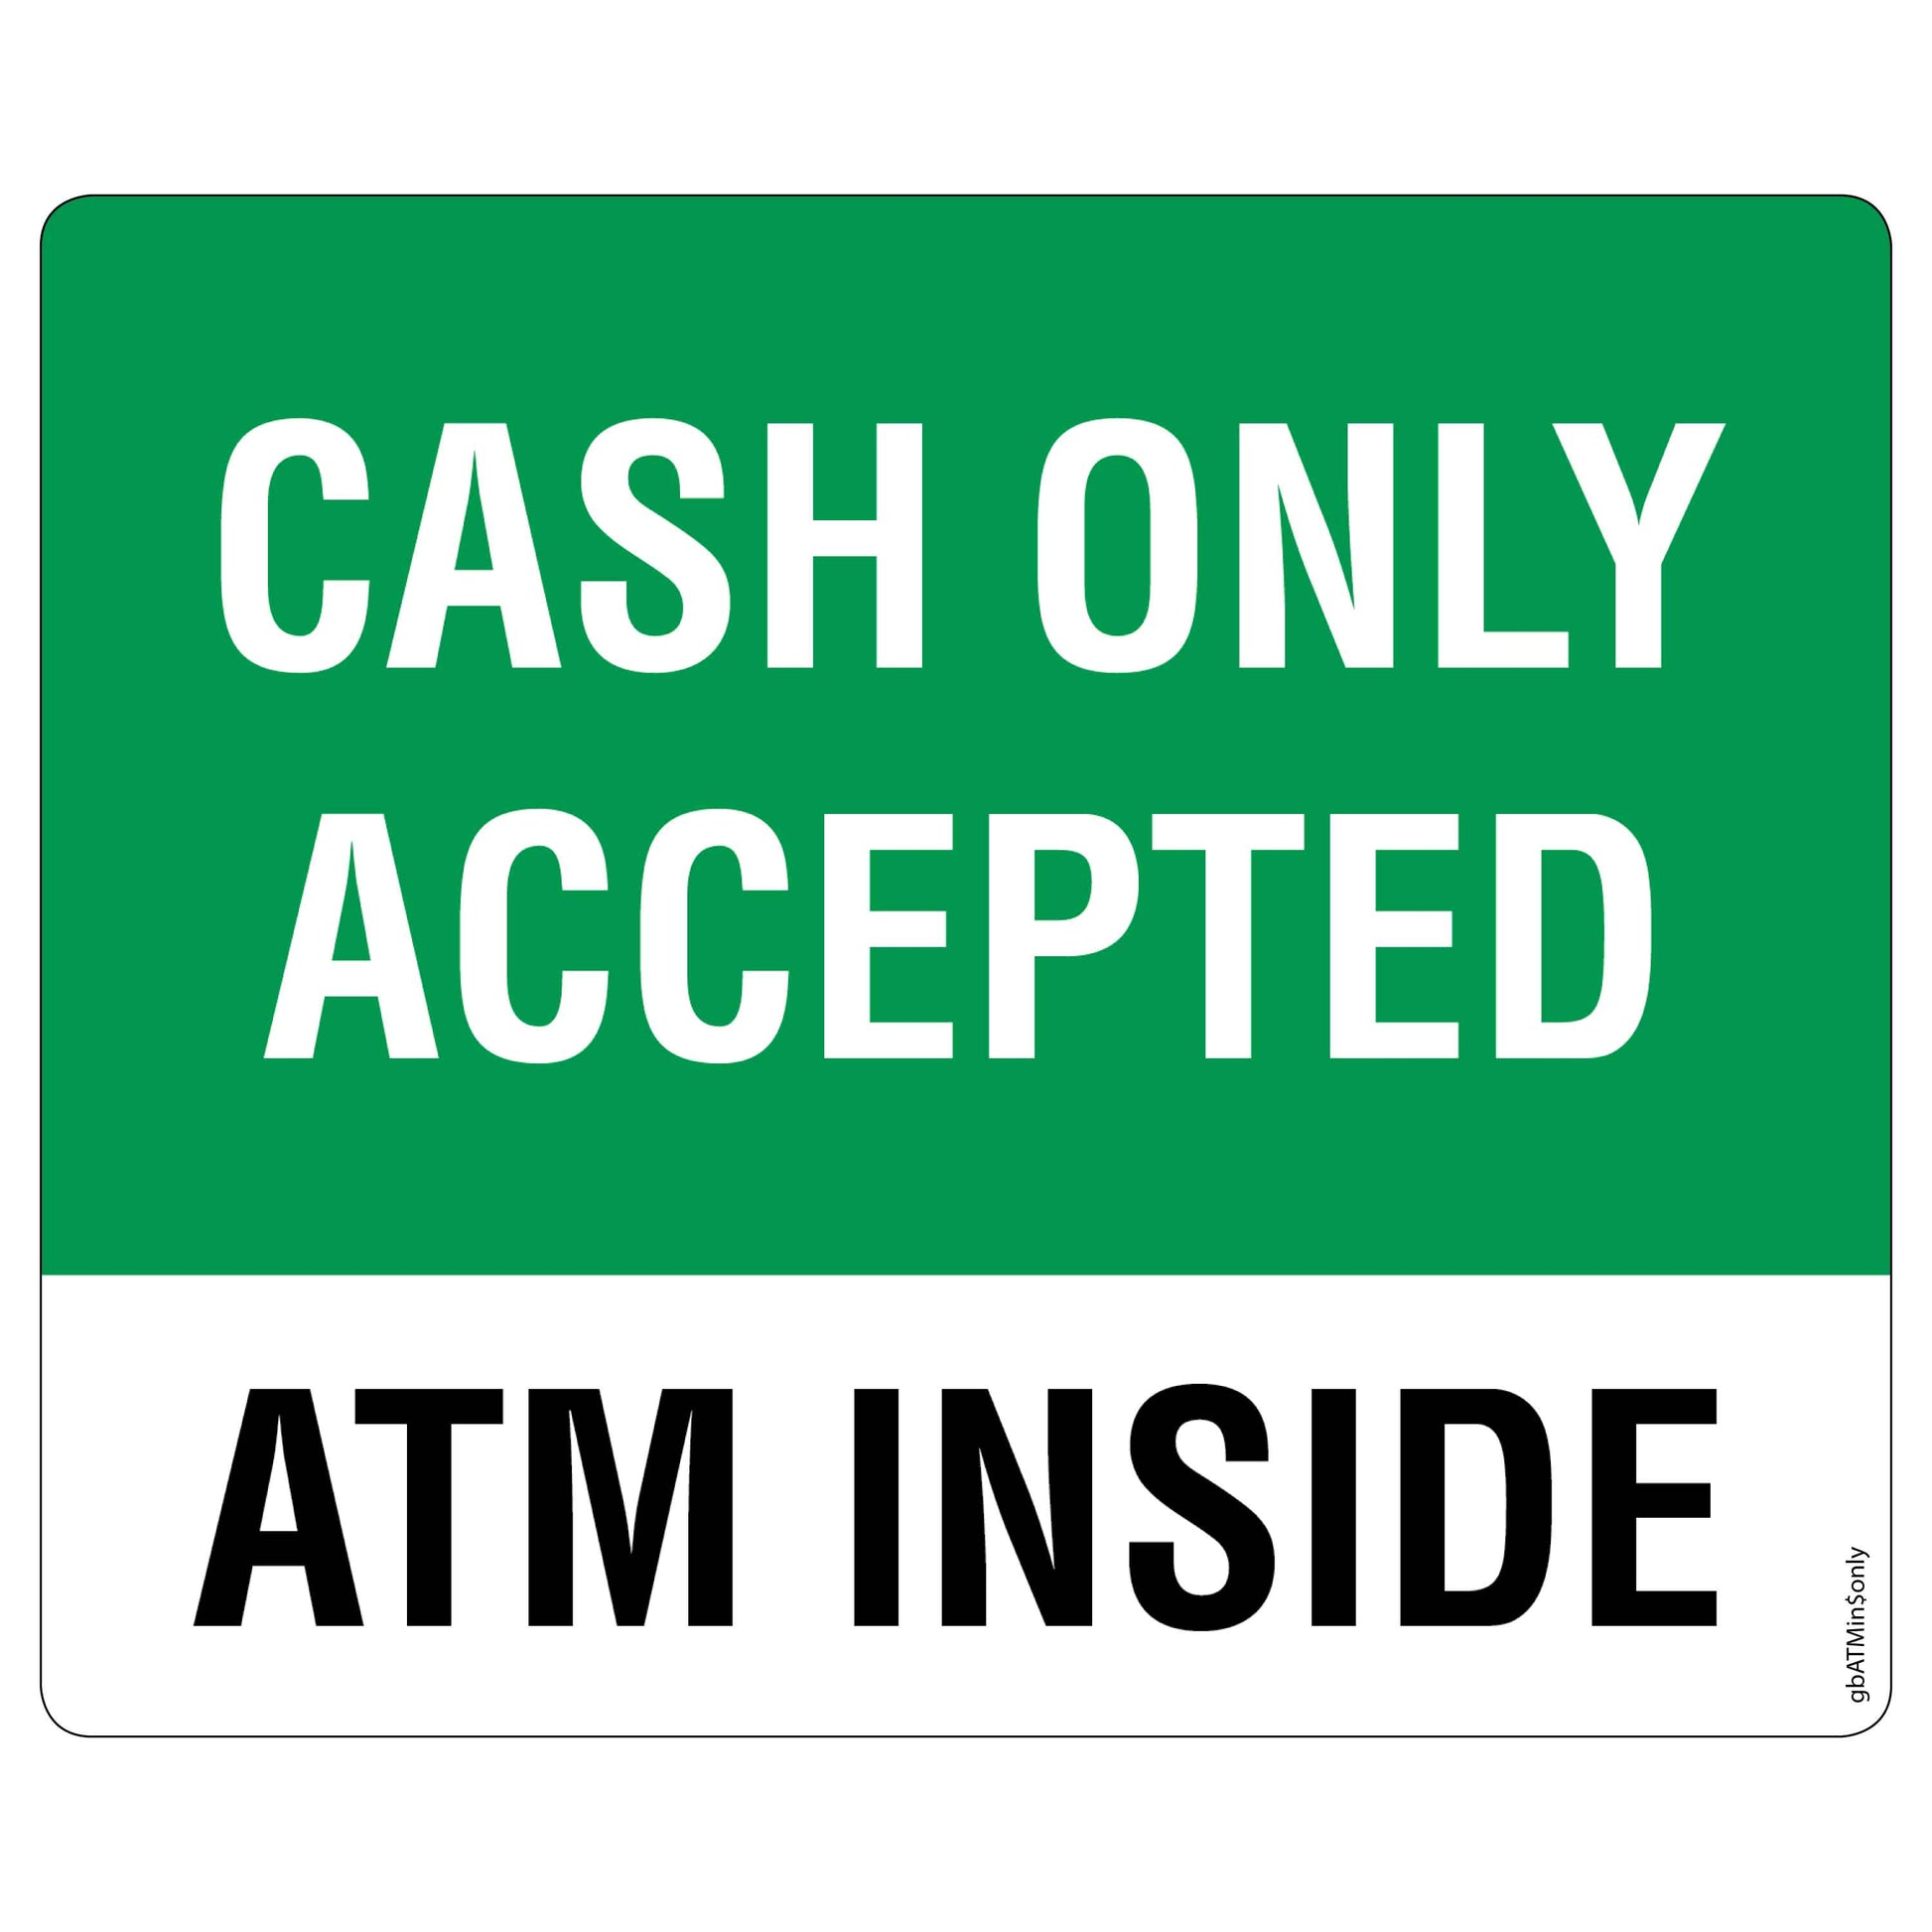 Large Cash Only Accepted - ATM Inside Decal. 6 inches by 5 inches in size. 